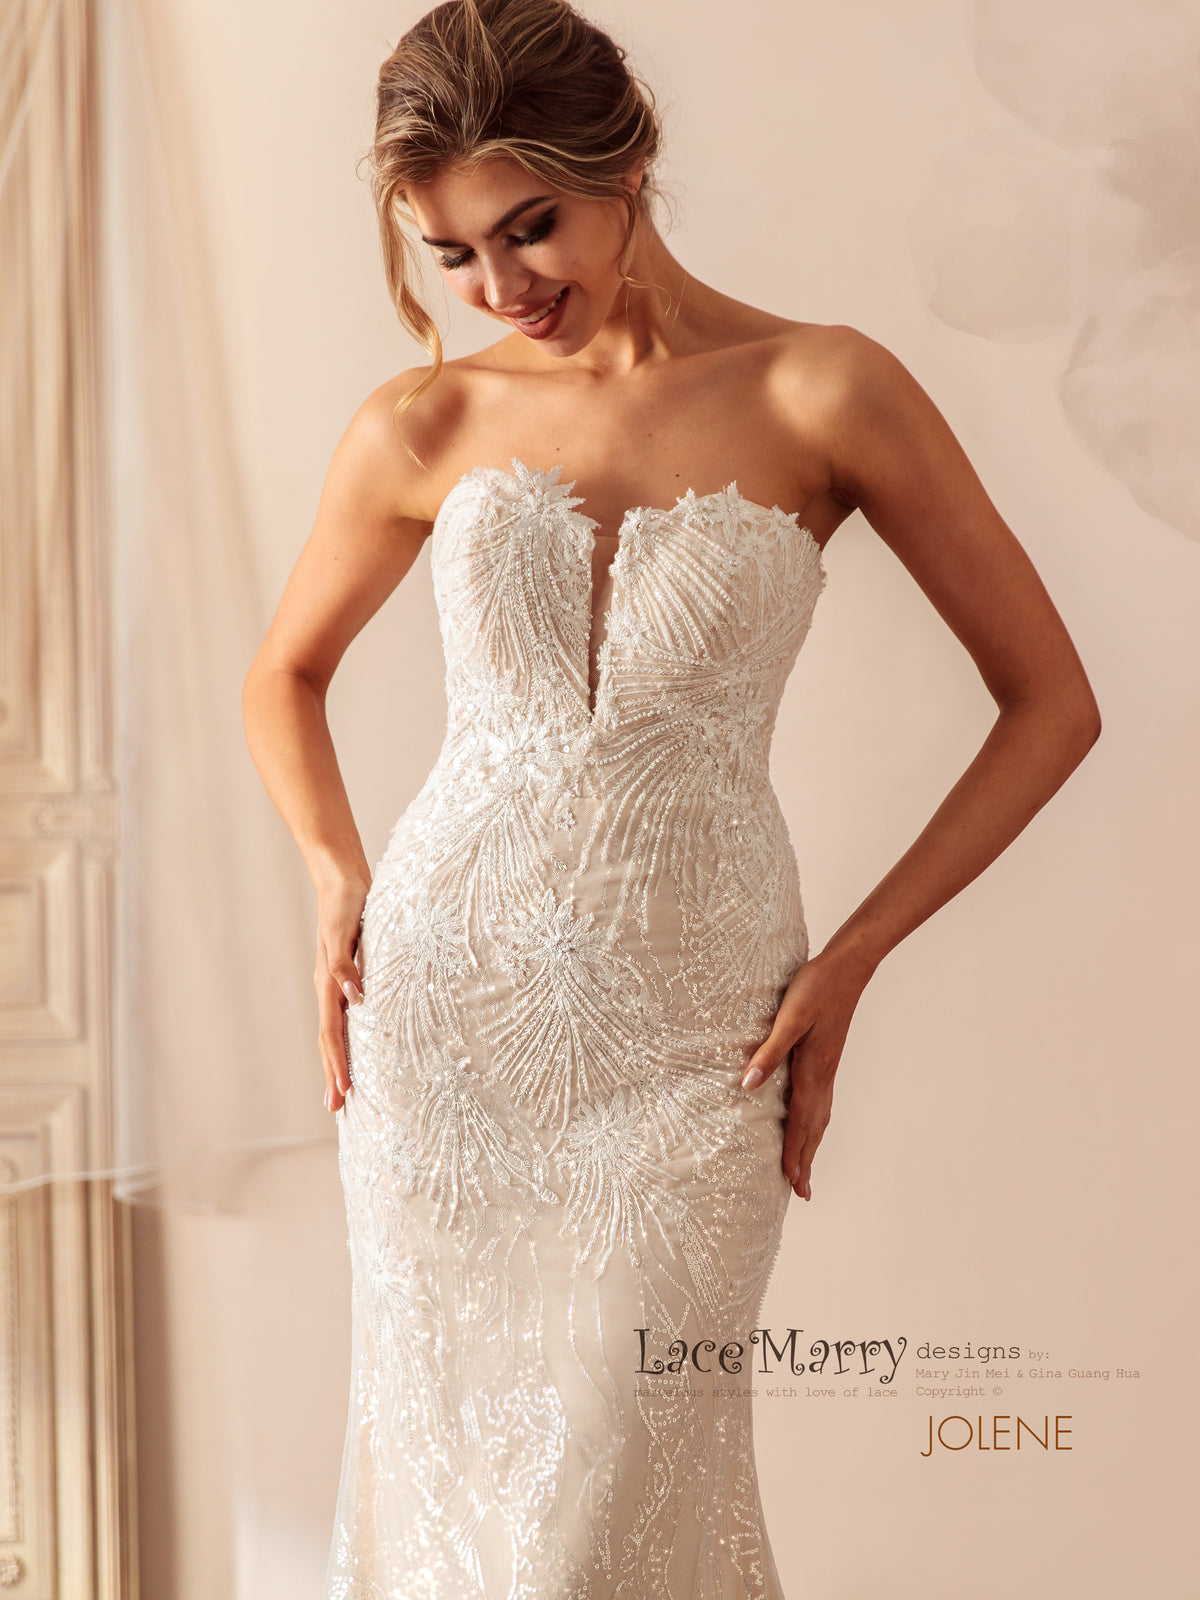 JOLENE / Strapless Wedding Dress with Plunge Neckline and Beaded Appliques